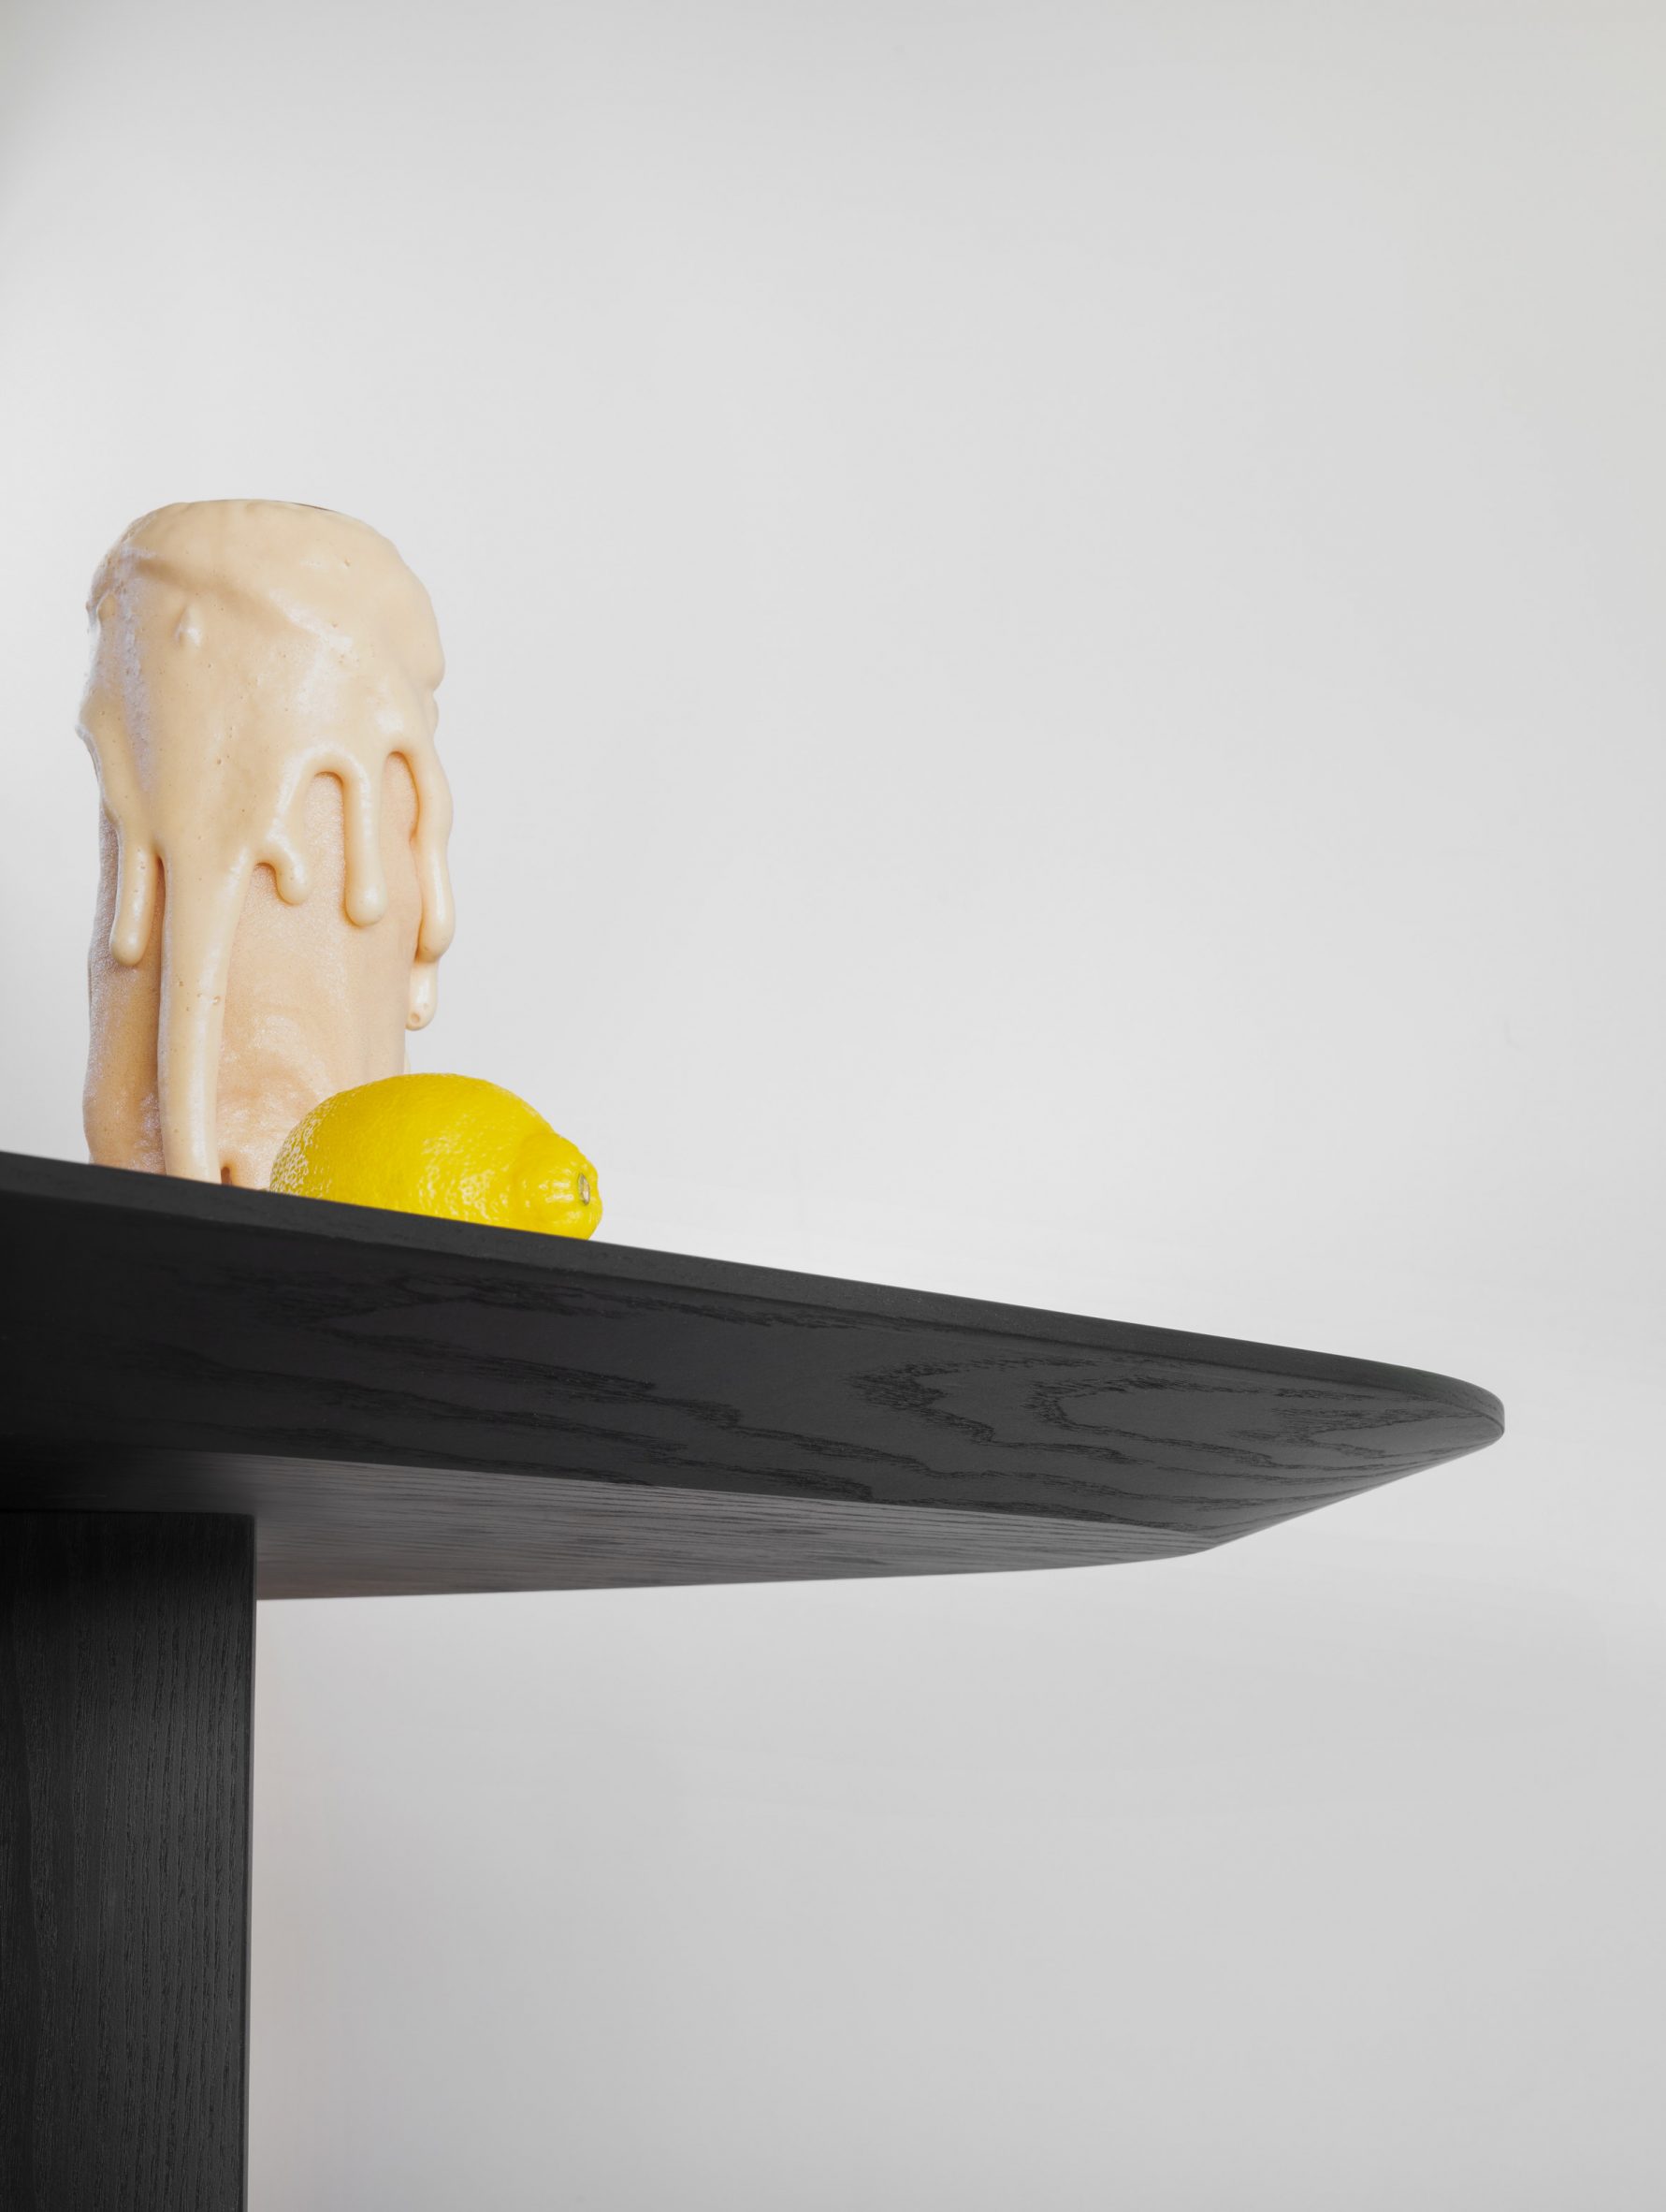 A photograph of the Plauto table by Paolo Cappello for Miniforms